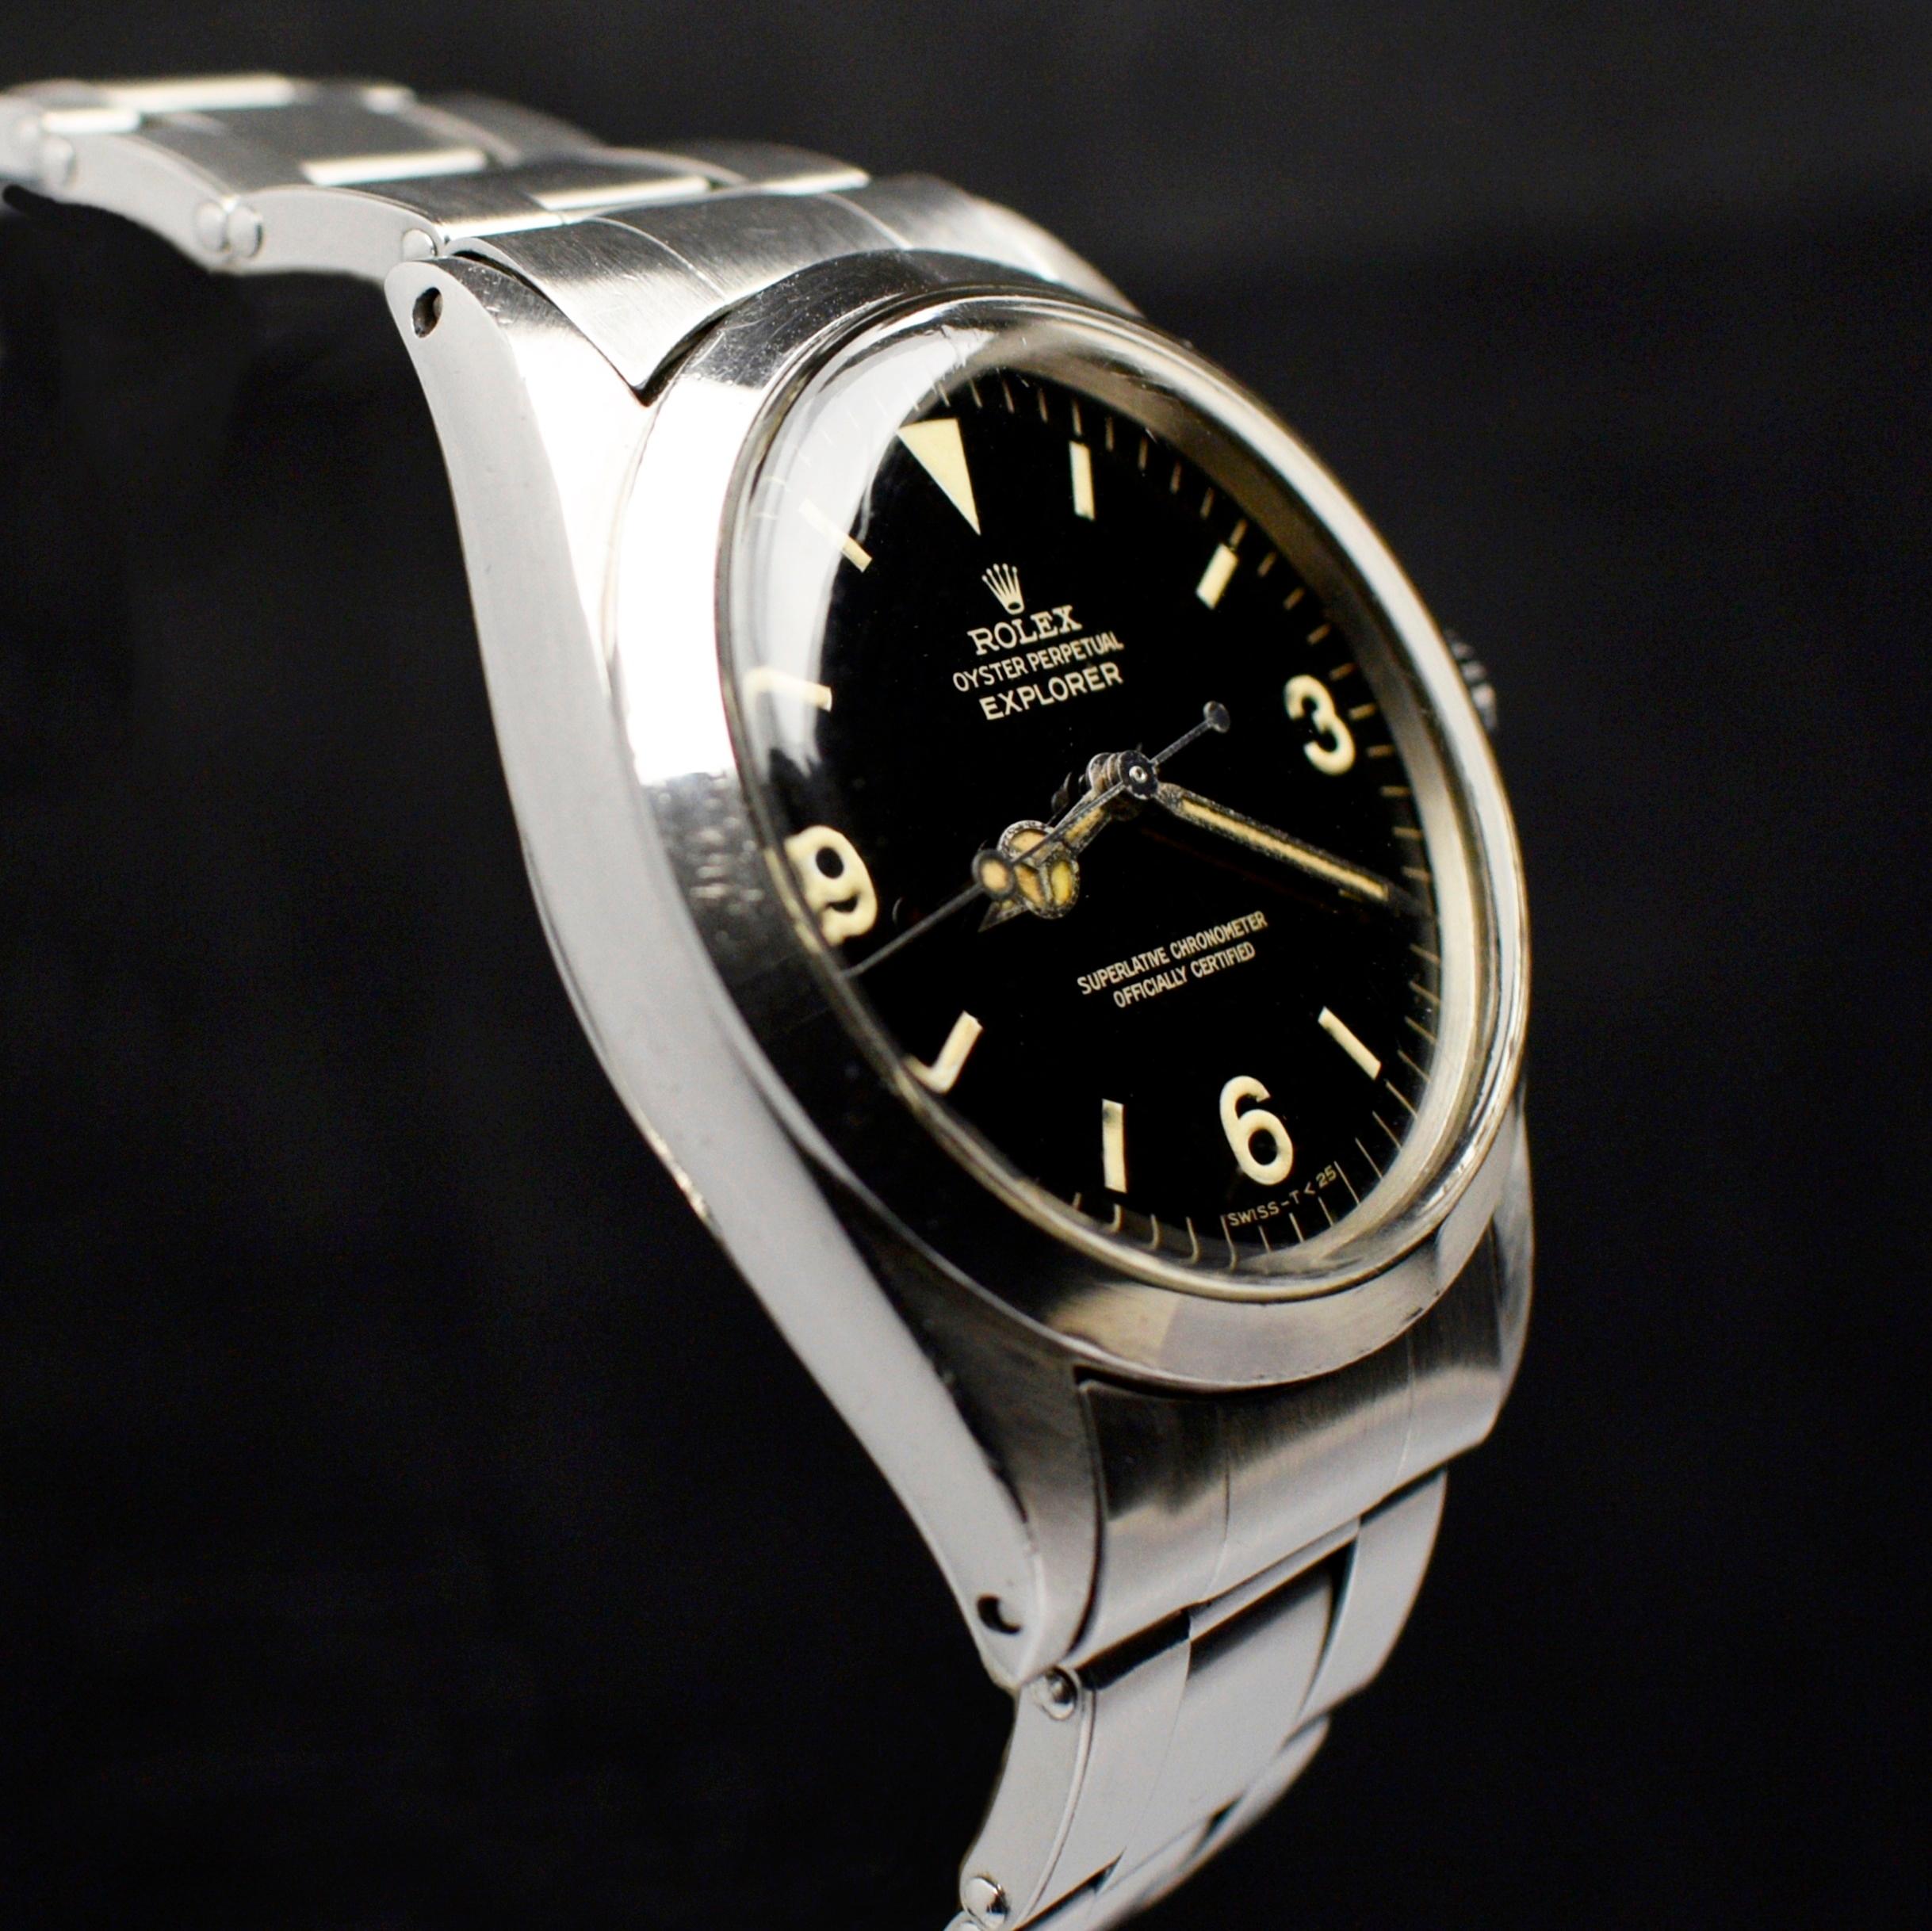 Women's or Men's Rolex Oyster Perpetual Explorer Gilt Glossy Dial 1016 Steel Automatic Watch 1966